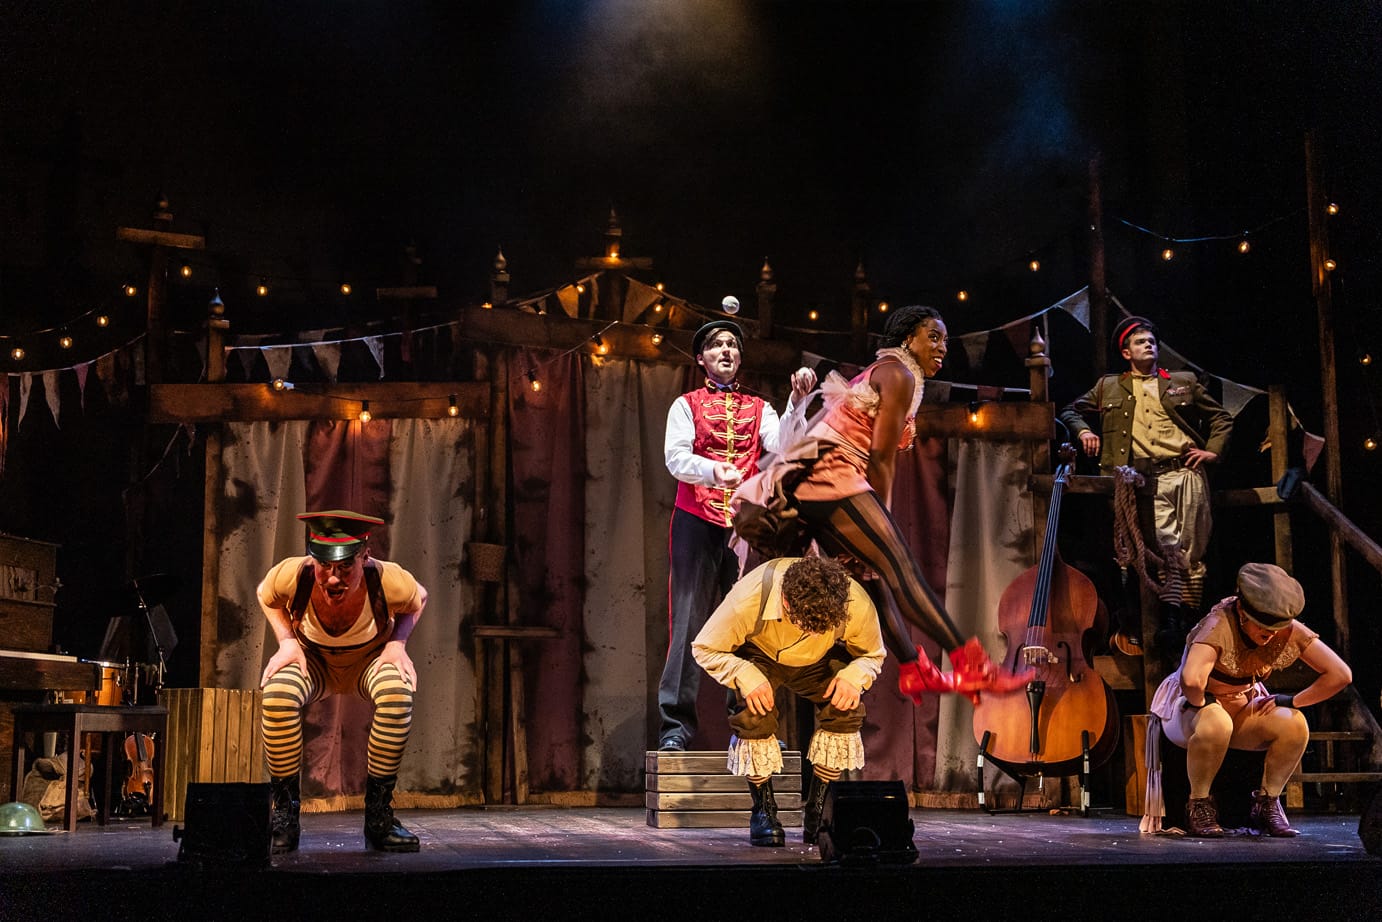 High quality production shot from a musical production of Oh What A Lovely War. The performers onstage wear vintage war-time garments with a burlesque twist. In the centre of the image, one performer is vaulting over another, grinning in mid air.